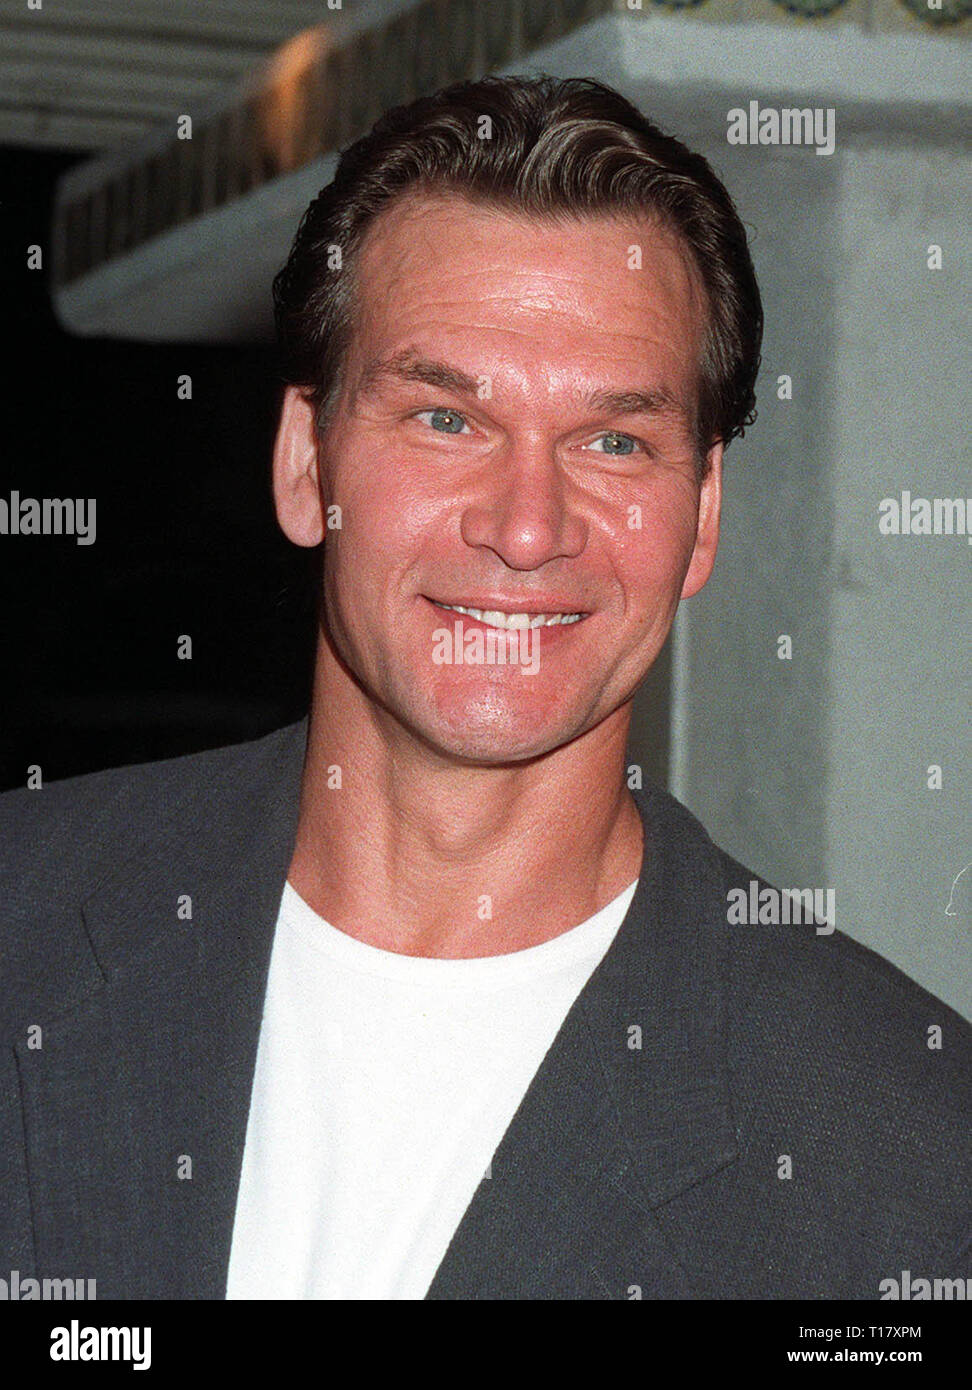 LOS ANGELES, CA. August 06, 1997: Actor Patrick Swayze at the premiere,  in Los Angeles, of Demi Moore's new movie, 'G.I. Jane.' Stock Photo